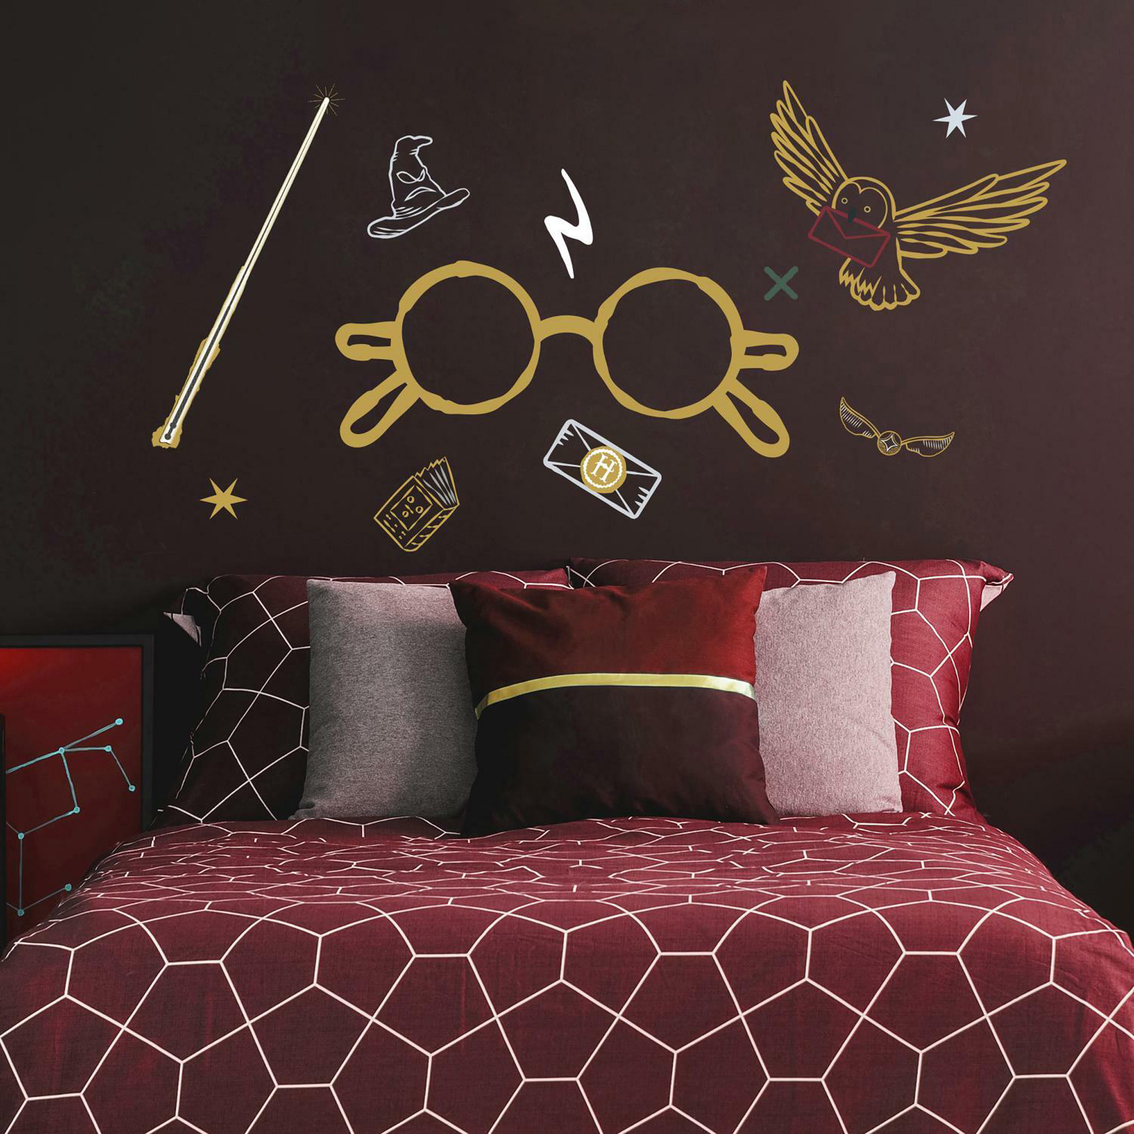 RoomMates Harry Potter Glasses Giant Wall Decal - Image 5 of 5